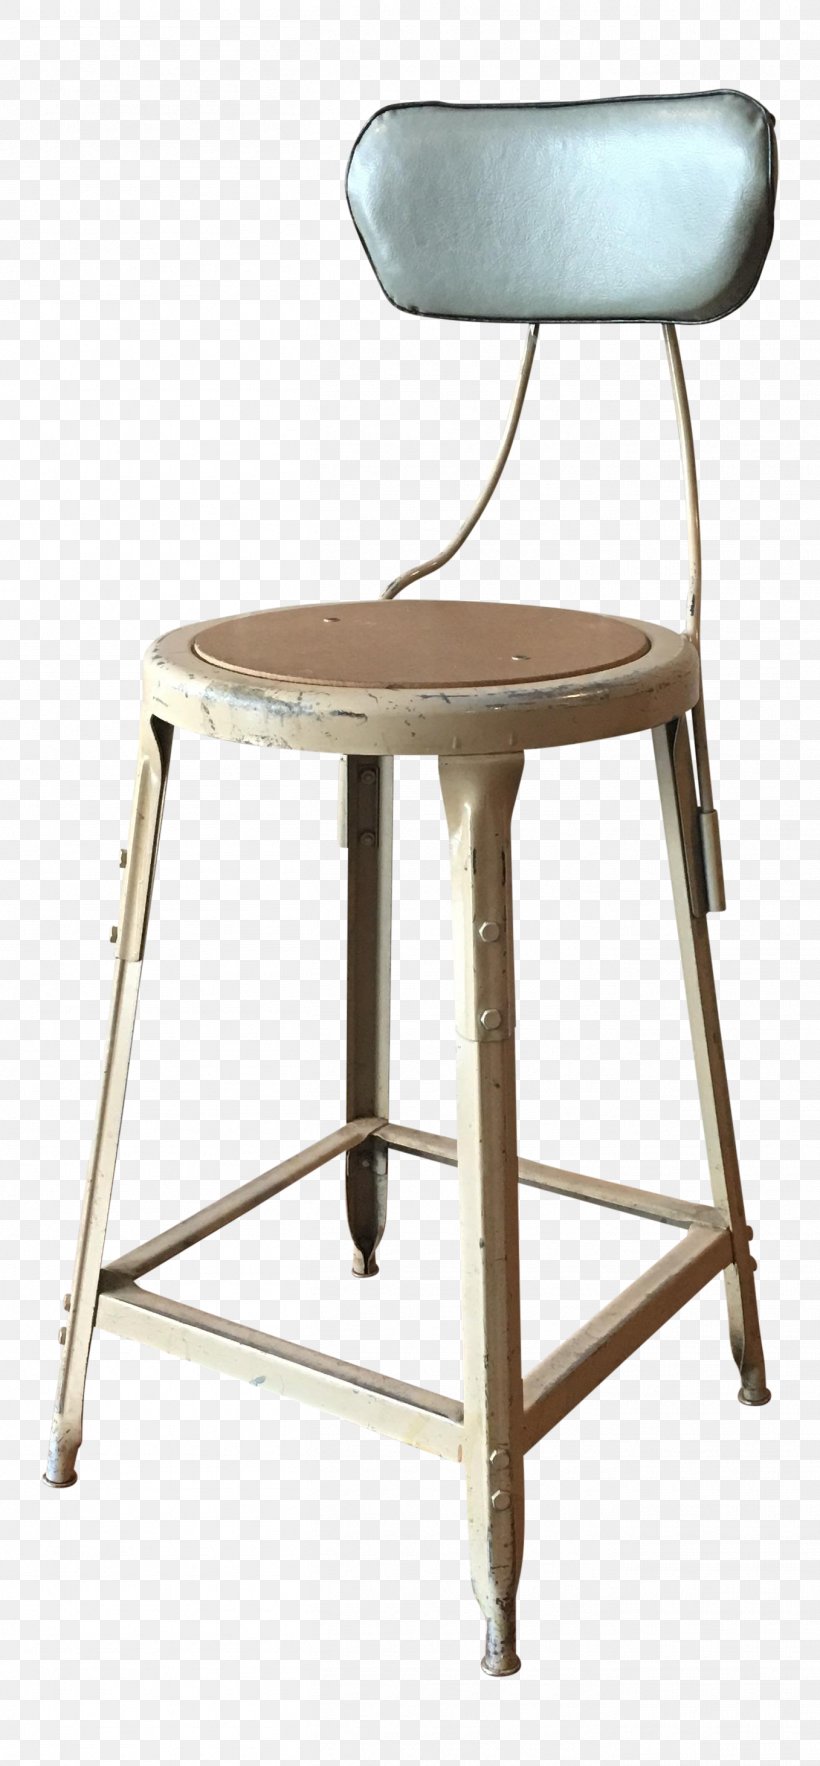 Bar Stool Chair, PNG, 1357x2924px, Bar Stool, Bar, Chair, Furniture, Seat Download Free